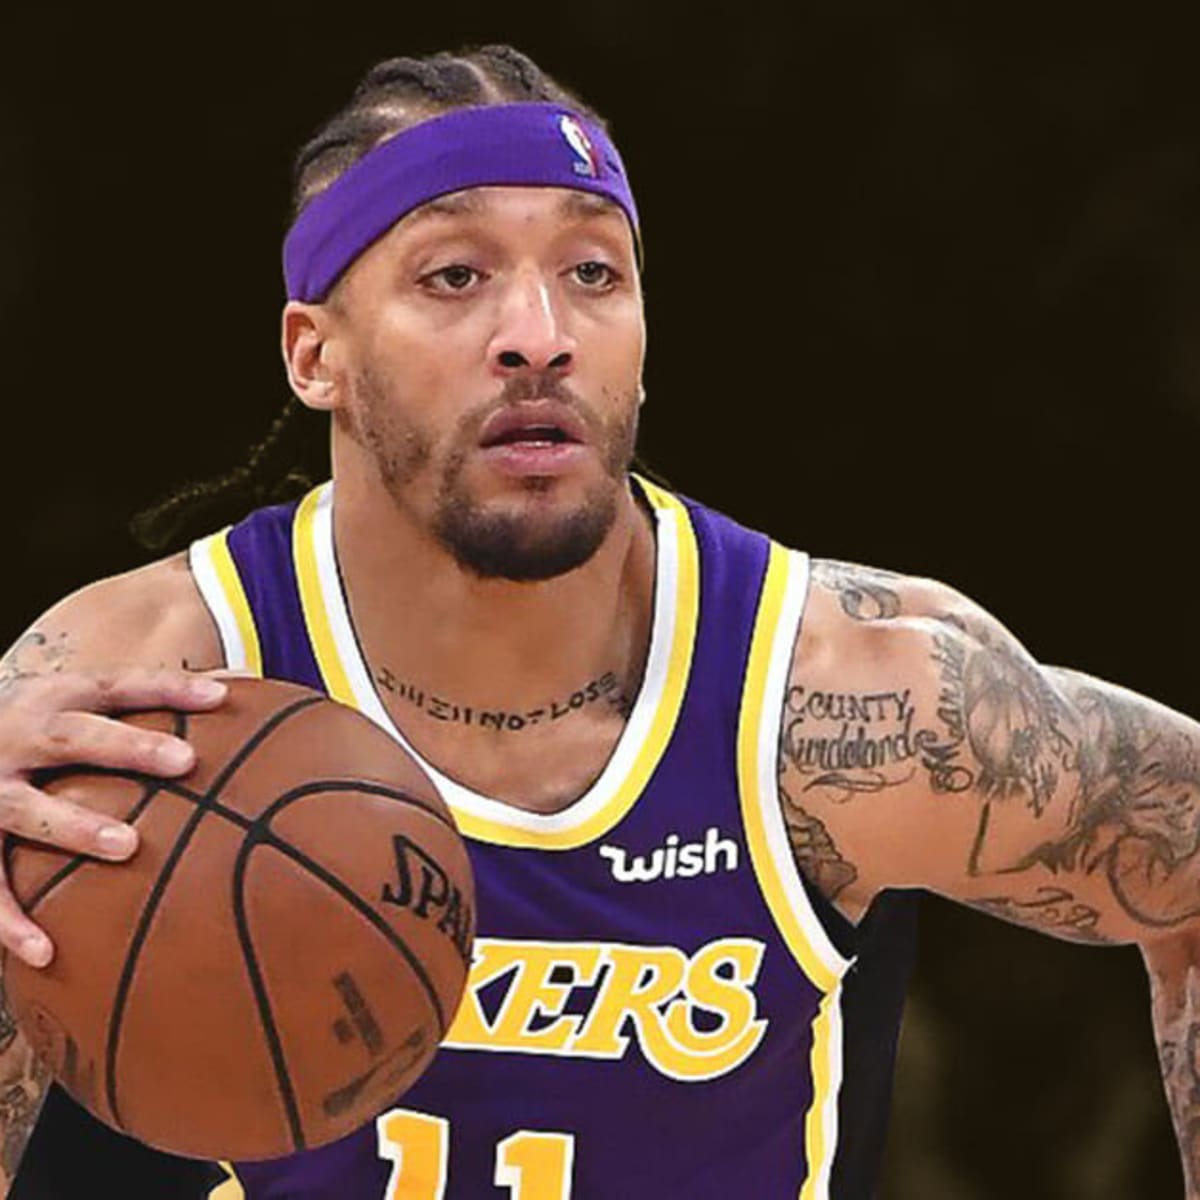 Michael Beasley: The road too rough to travel - Basketball Society